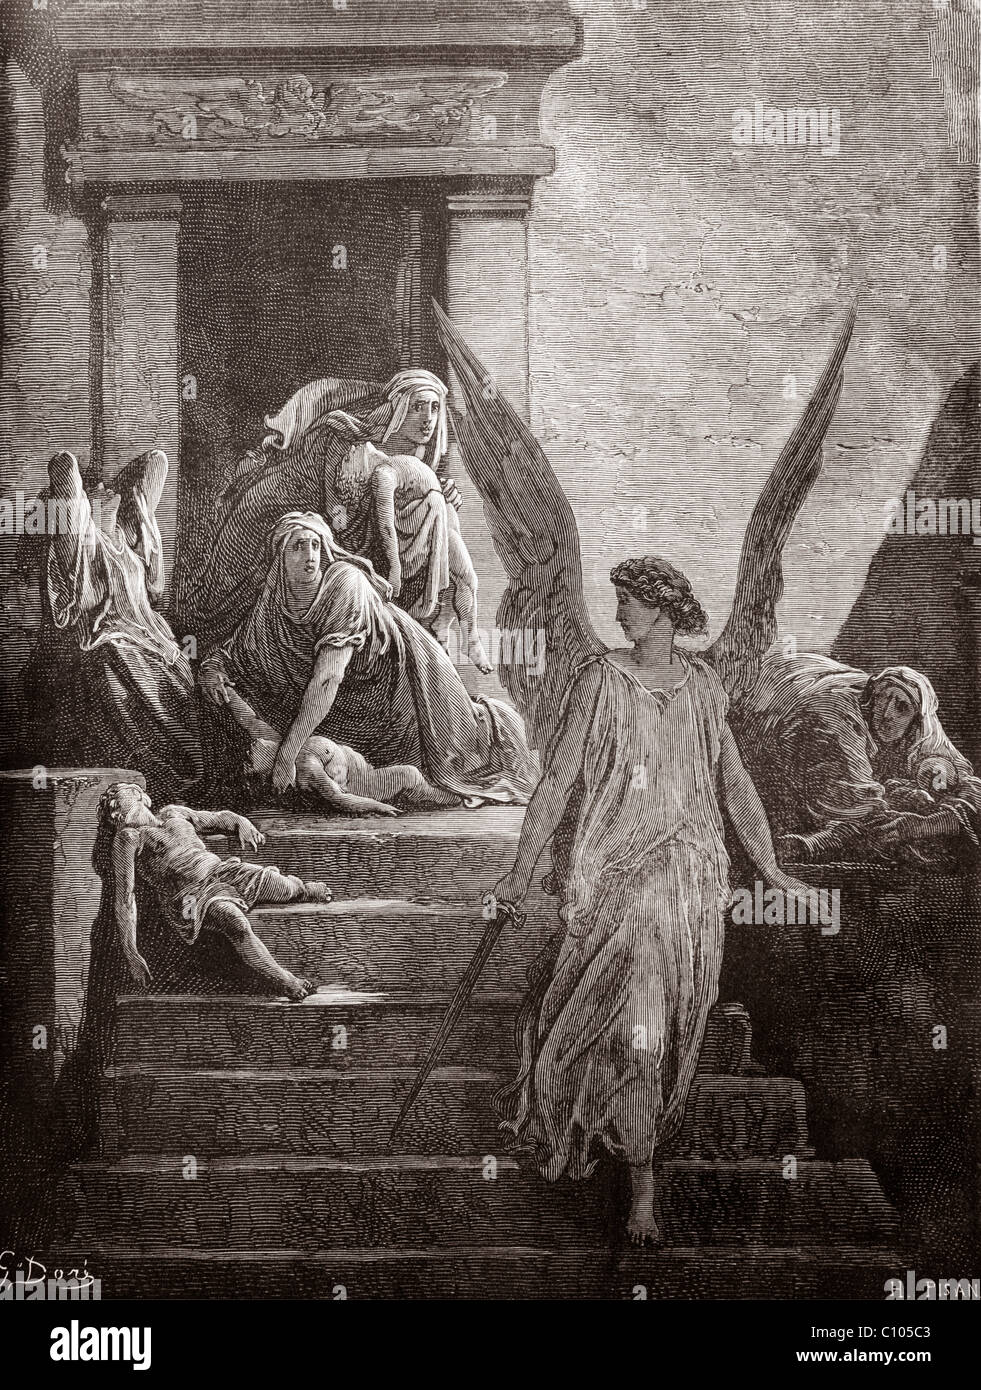 Bible Illustration Of The Firstborn Slain By Gustave Dore Exodus 12:29-30 Stock Photo